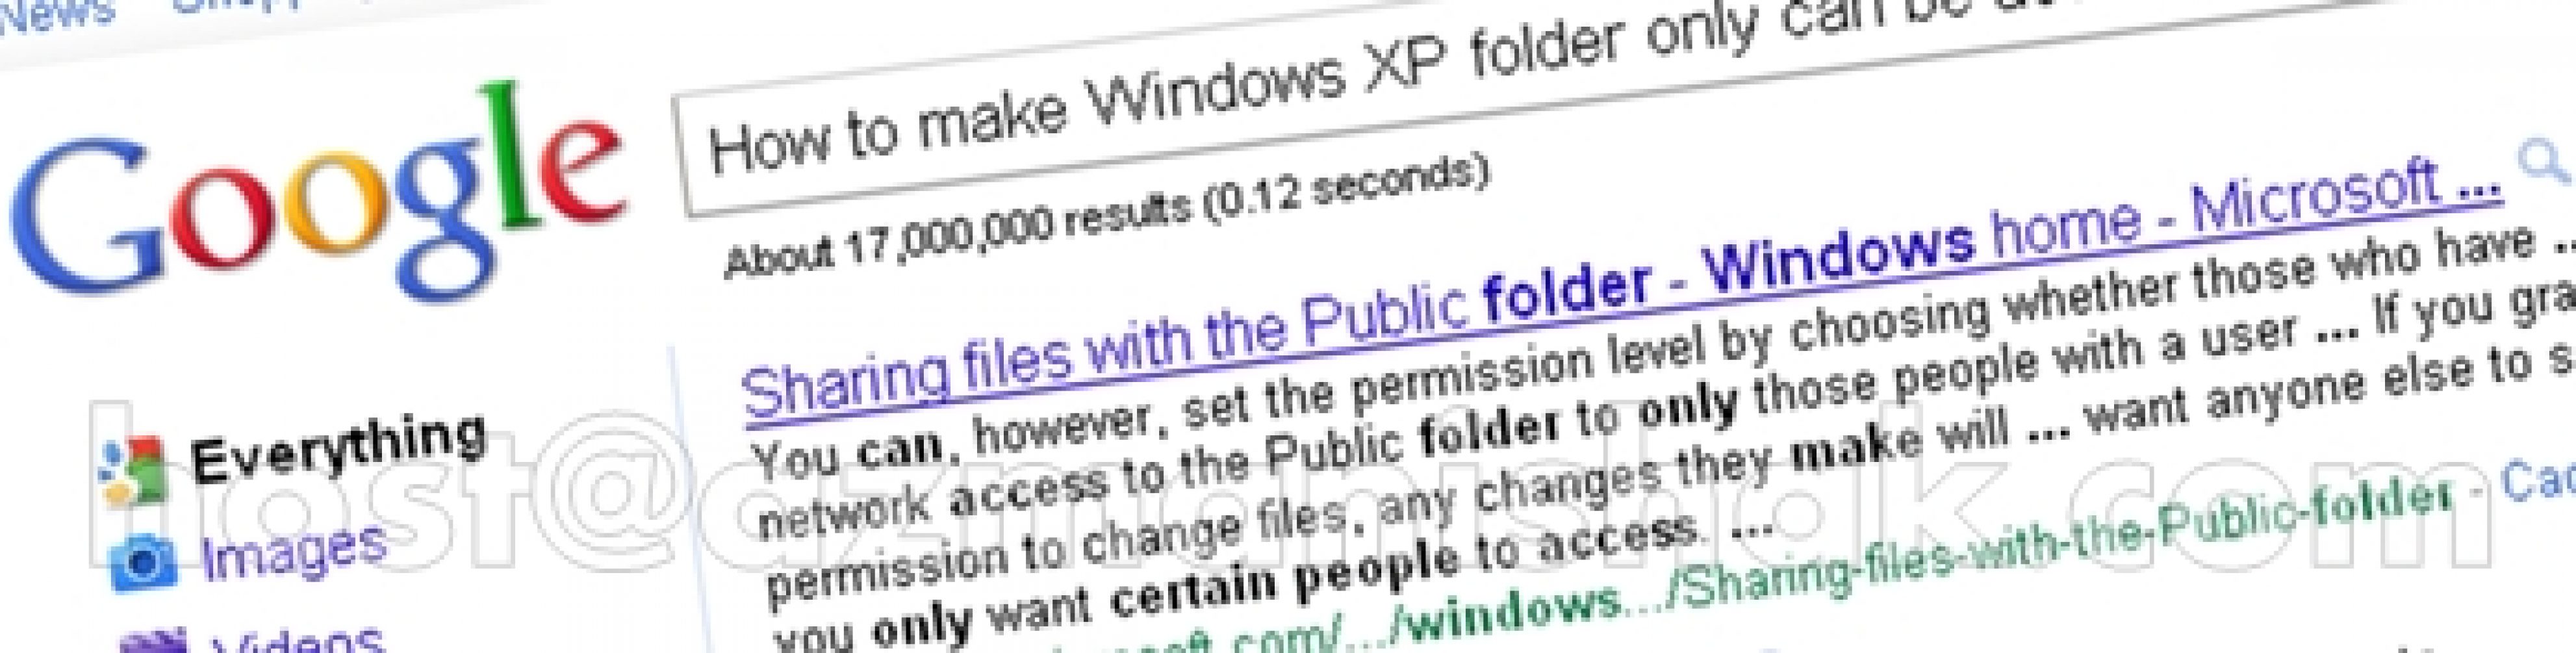 How to make Windows XP folder only can be access by certain people